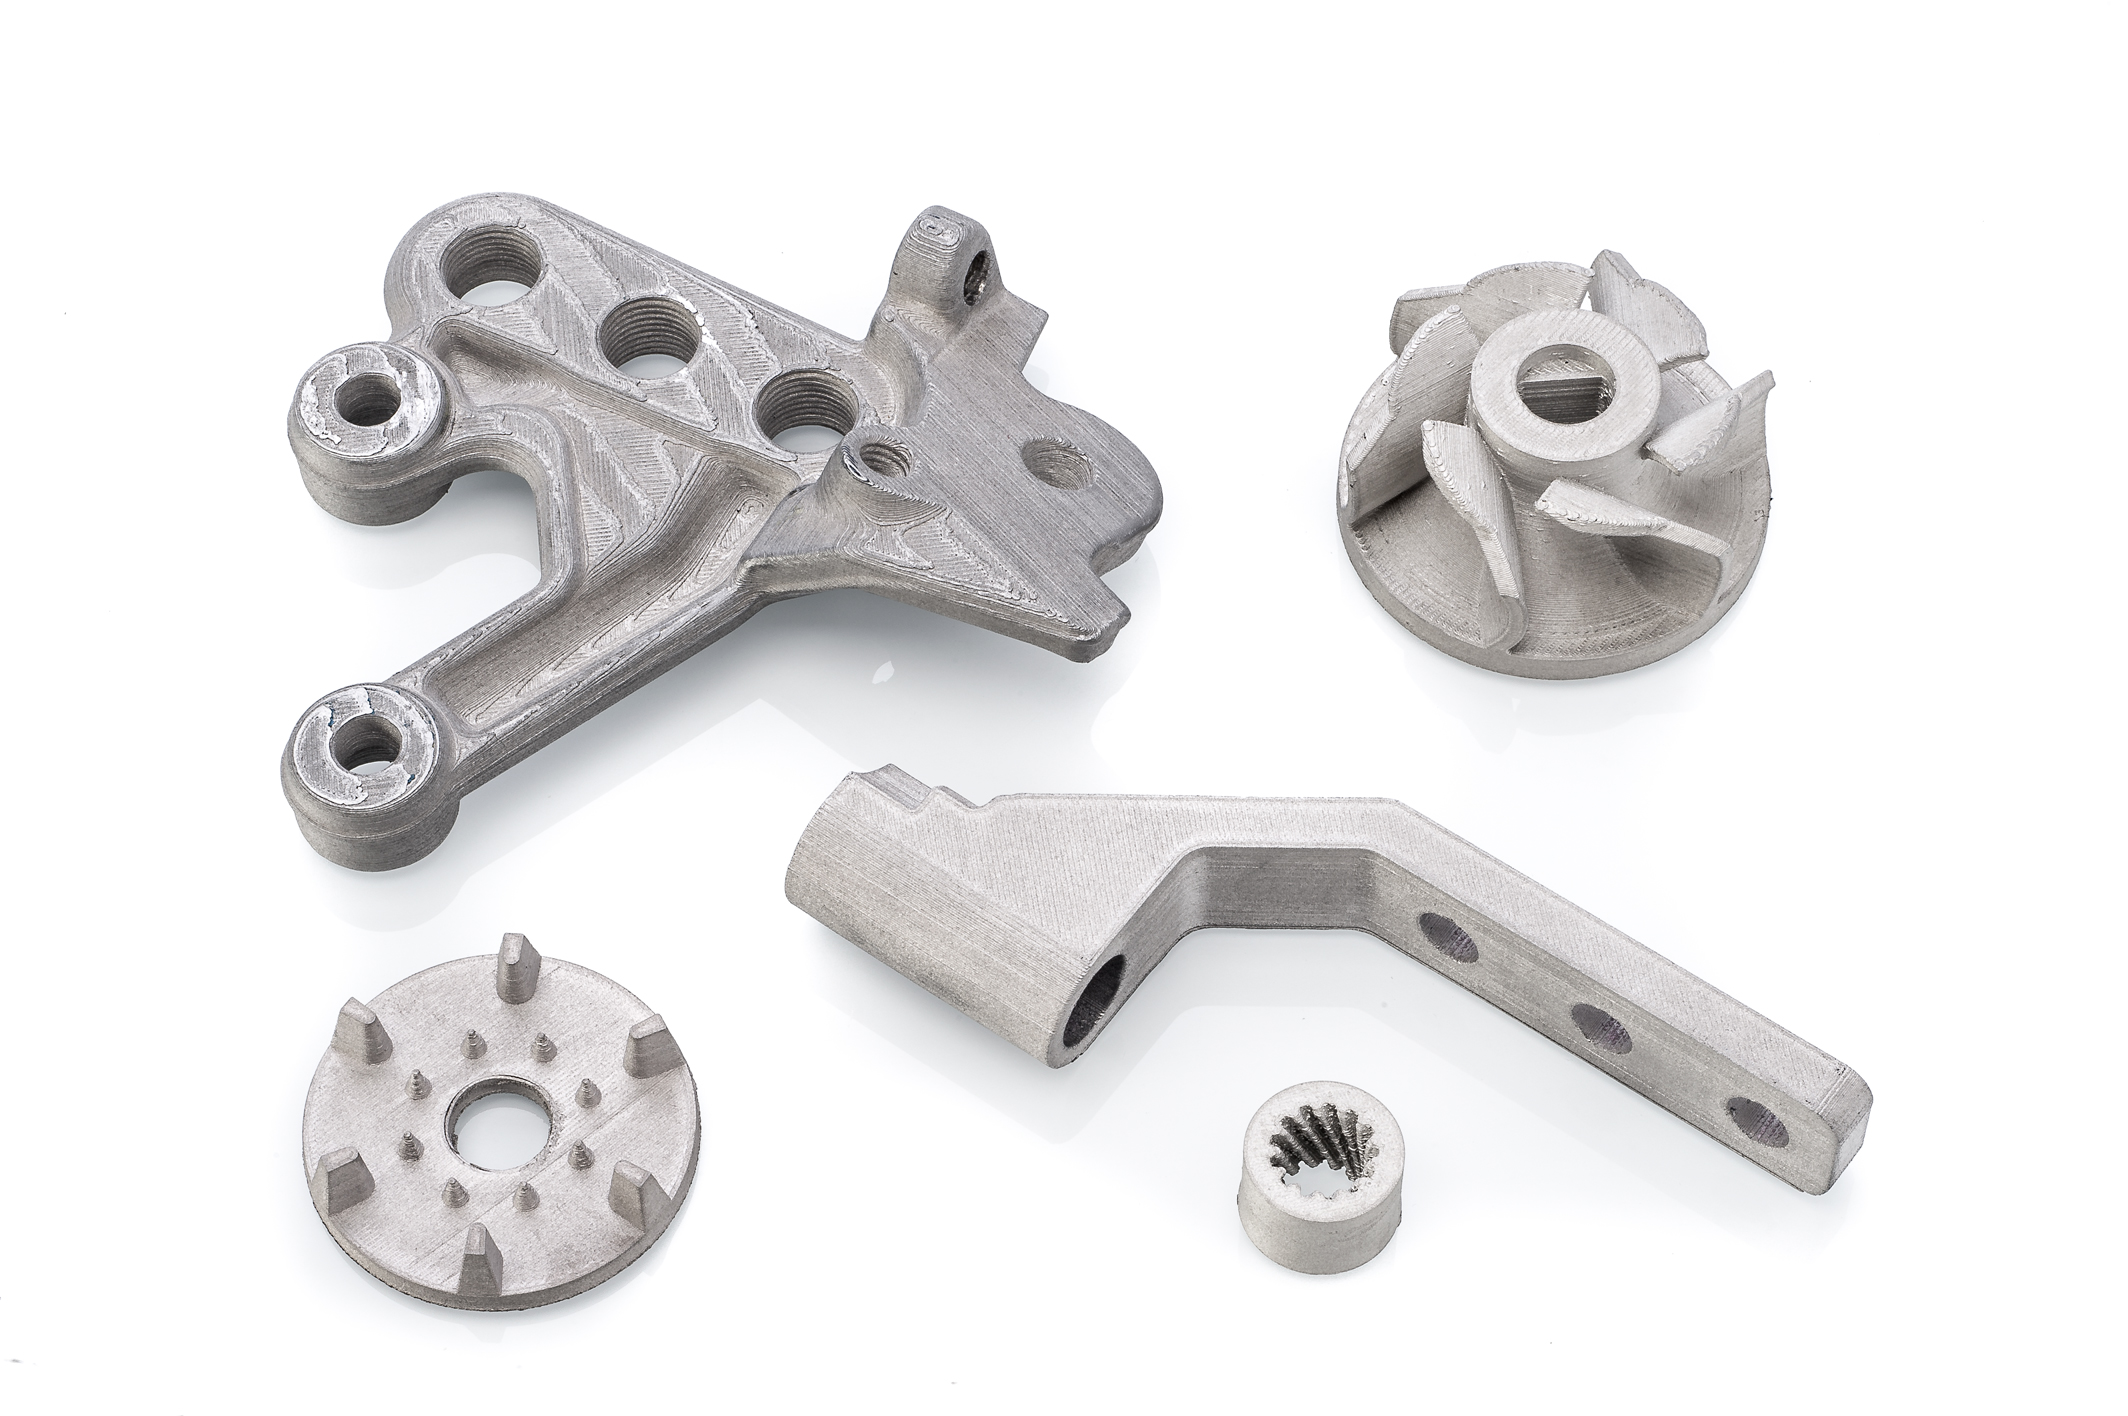 Applications 3D printed with Ultimaker Metal FFF solution, including BASF Forward AM Ultrafuse® 17-4 PH and Ultrafuse® Support Layer filaments, resulting in strong parts with complex geometries.  Photo via Ultimaker.